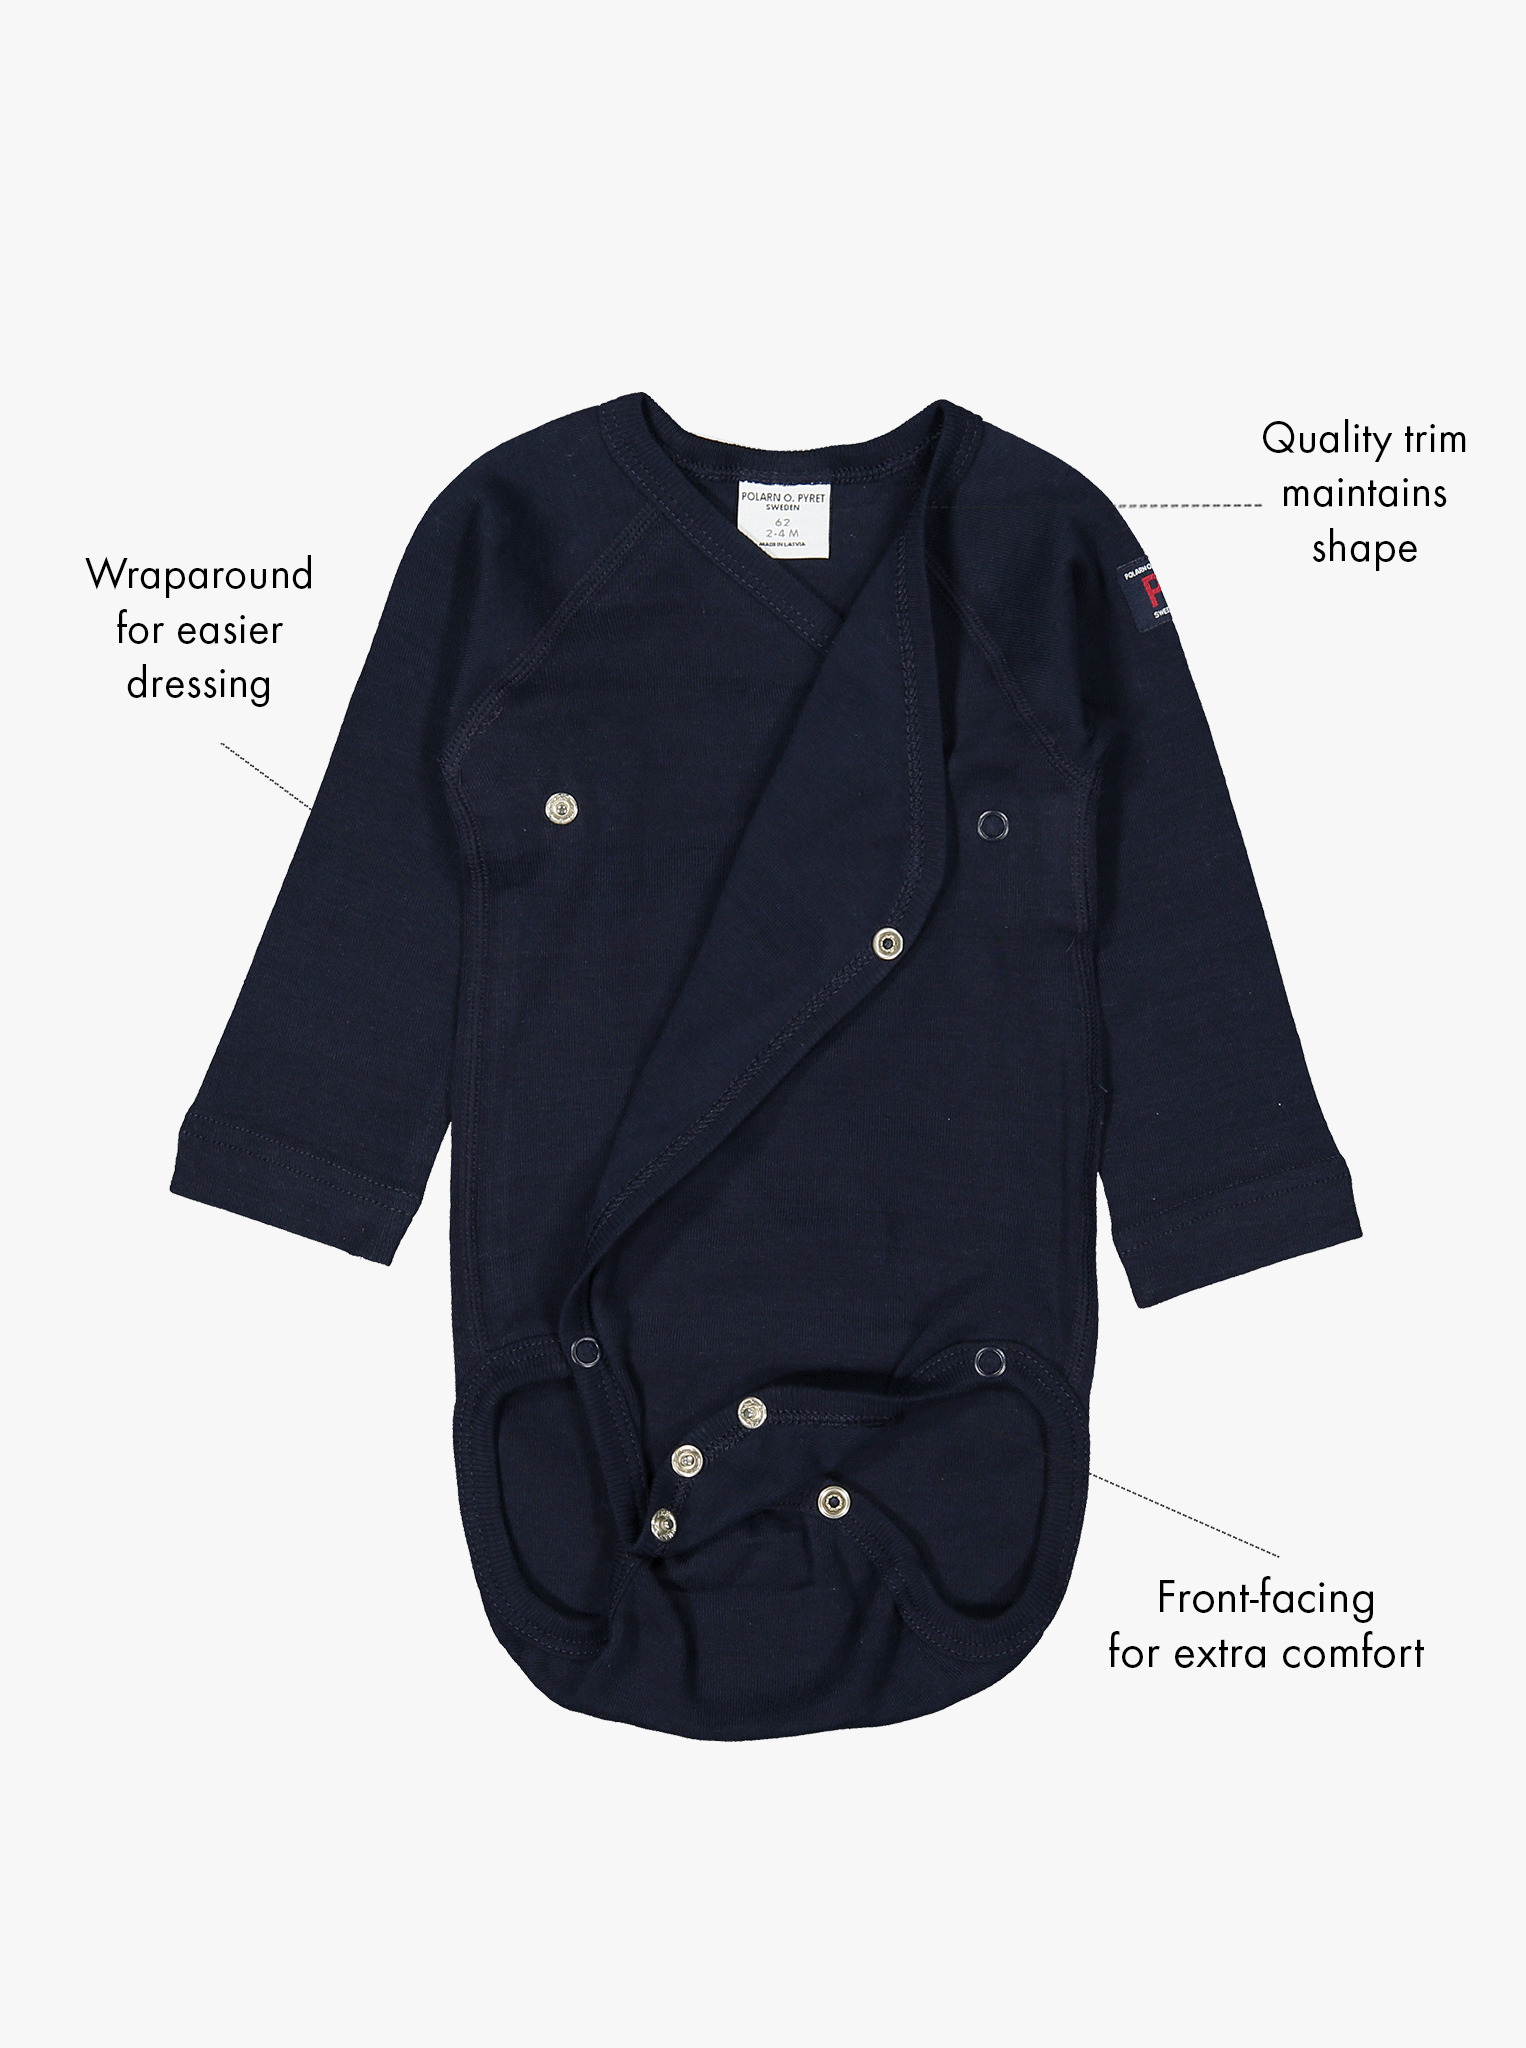 newborn babygrow navy blue, ethical quality organic cotton, polarn o. pyret classic, features shown as text labels on the right.